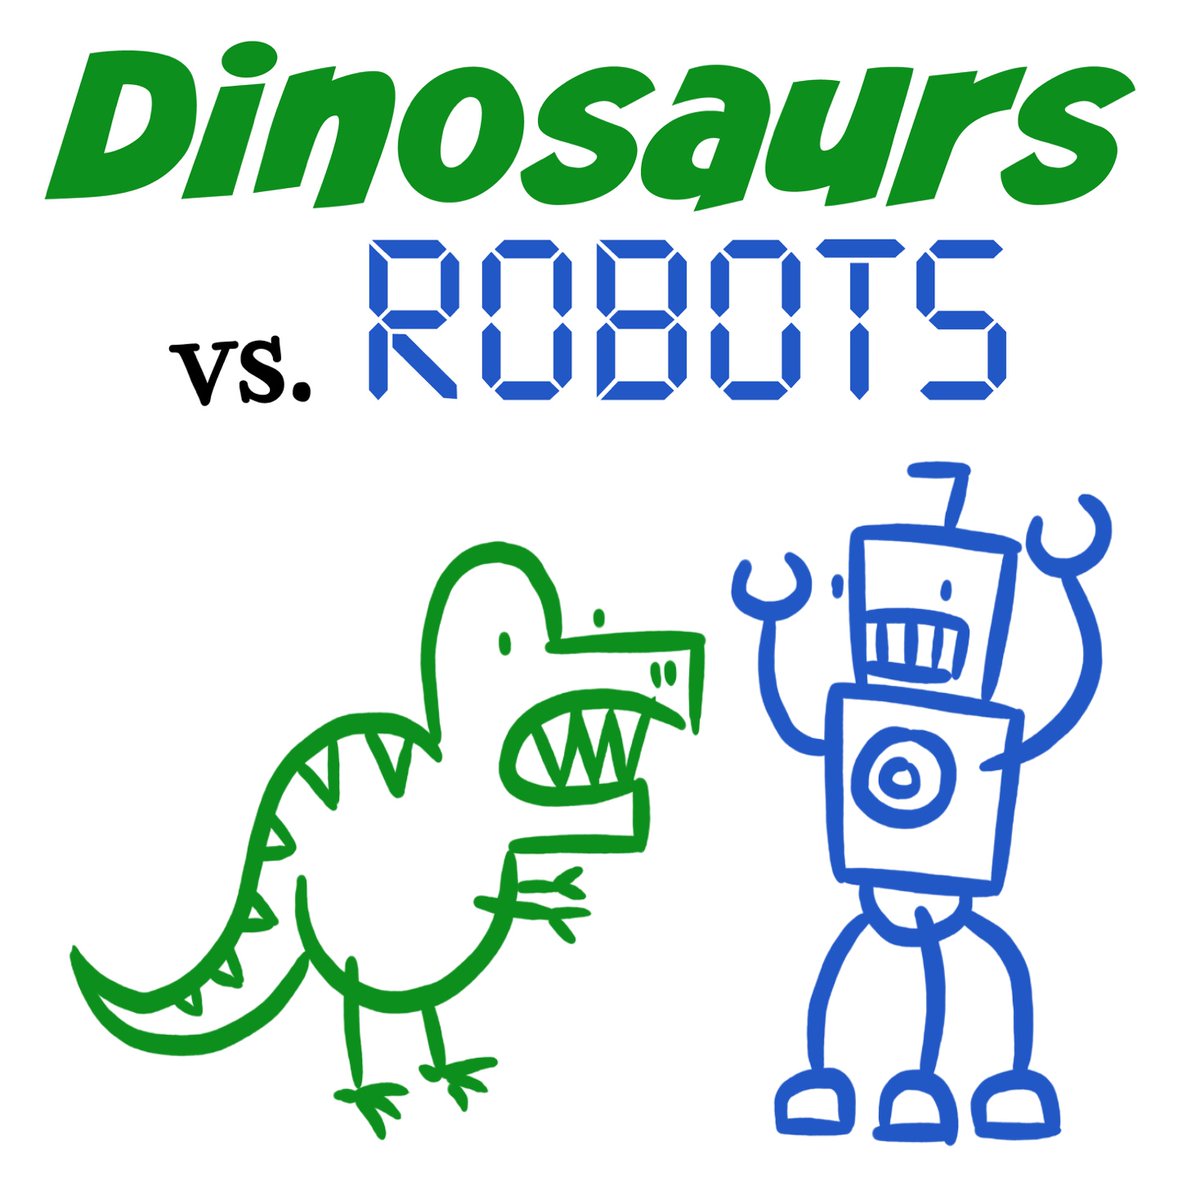 Gentle Reminder -> I'm trying something new - a Zoom cartooning class! The first class is Dinosaurs vs. Robots on 8/22 at 11 AM CST. It's just $10 per screen. Here's the link: py.pl/254B3FAKsr5 Hope to see you there!!